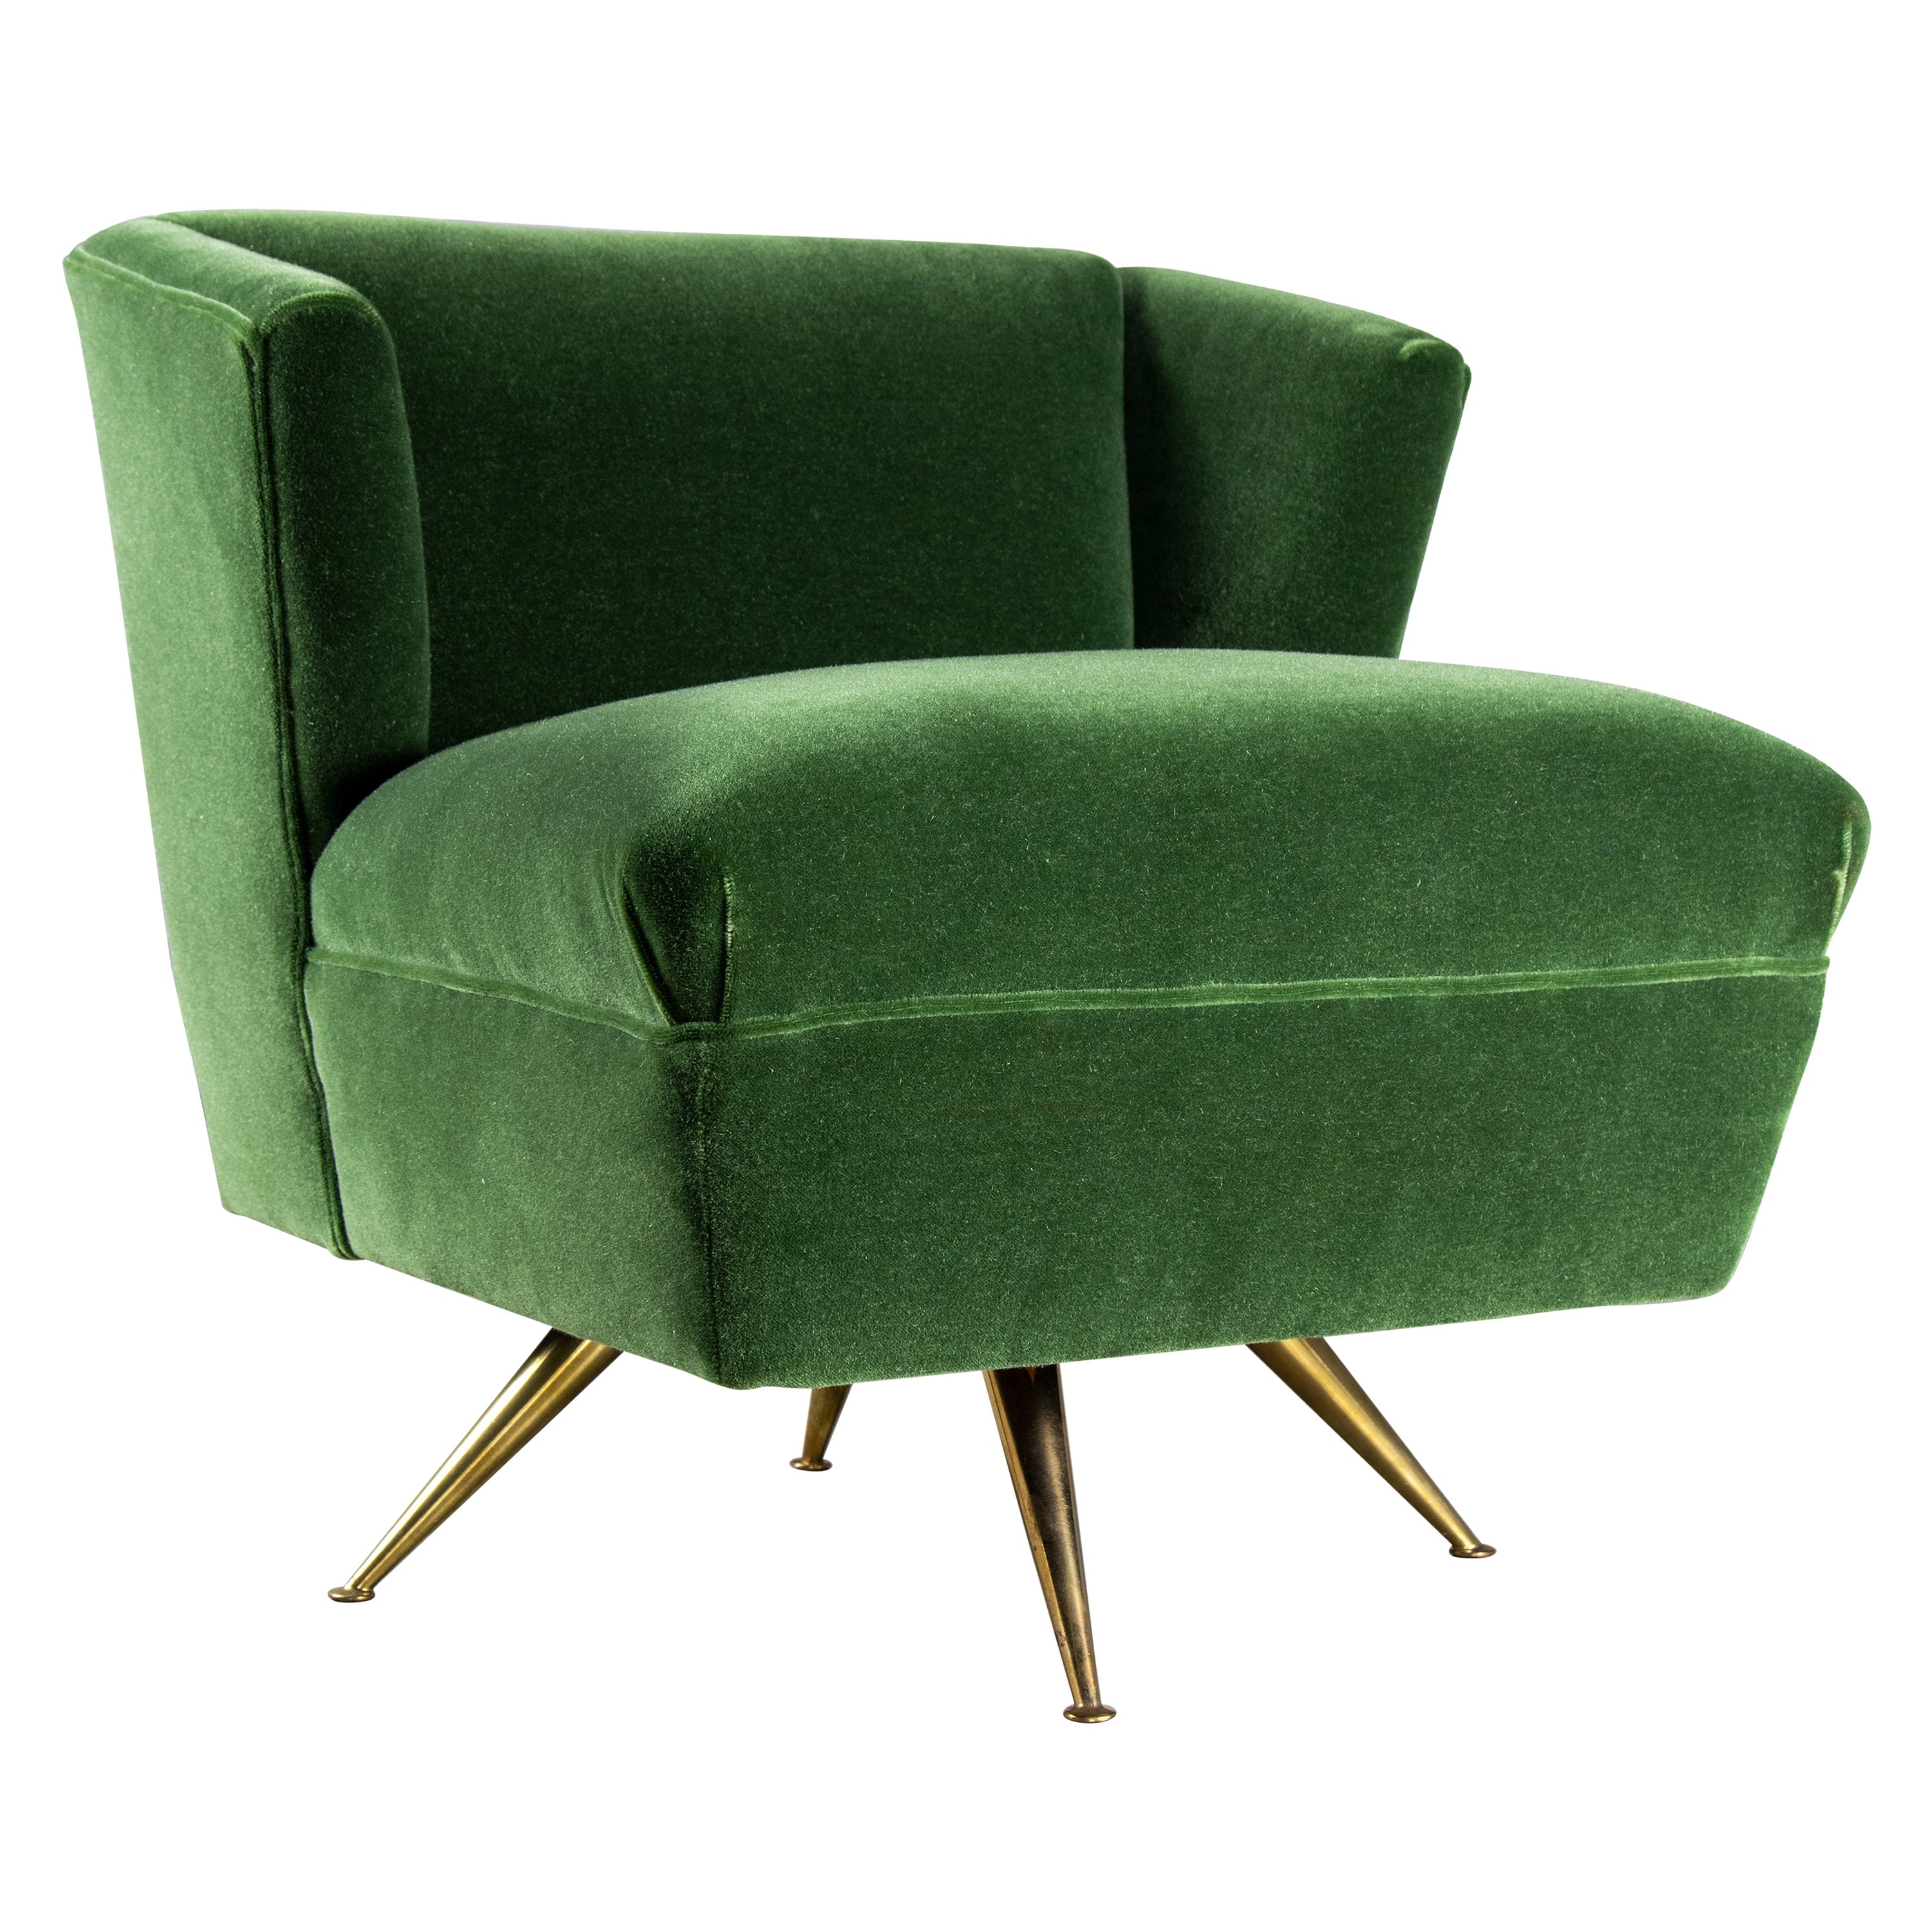 1950s Henry P Glass Swivel Lounge Chair Green Mohair on brass legs JL Chase Co. For Sale